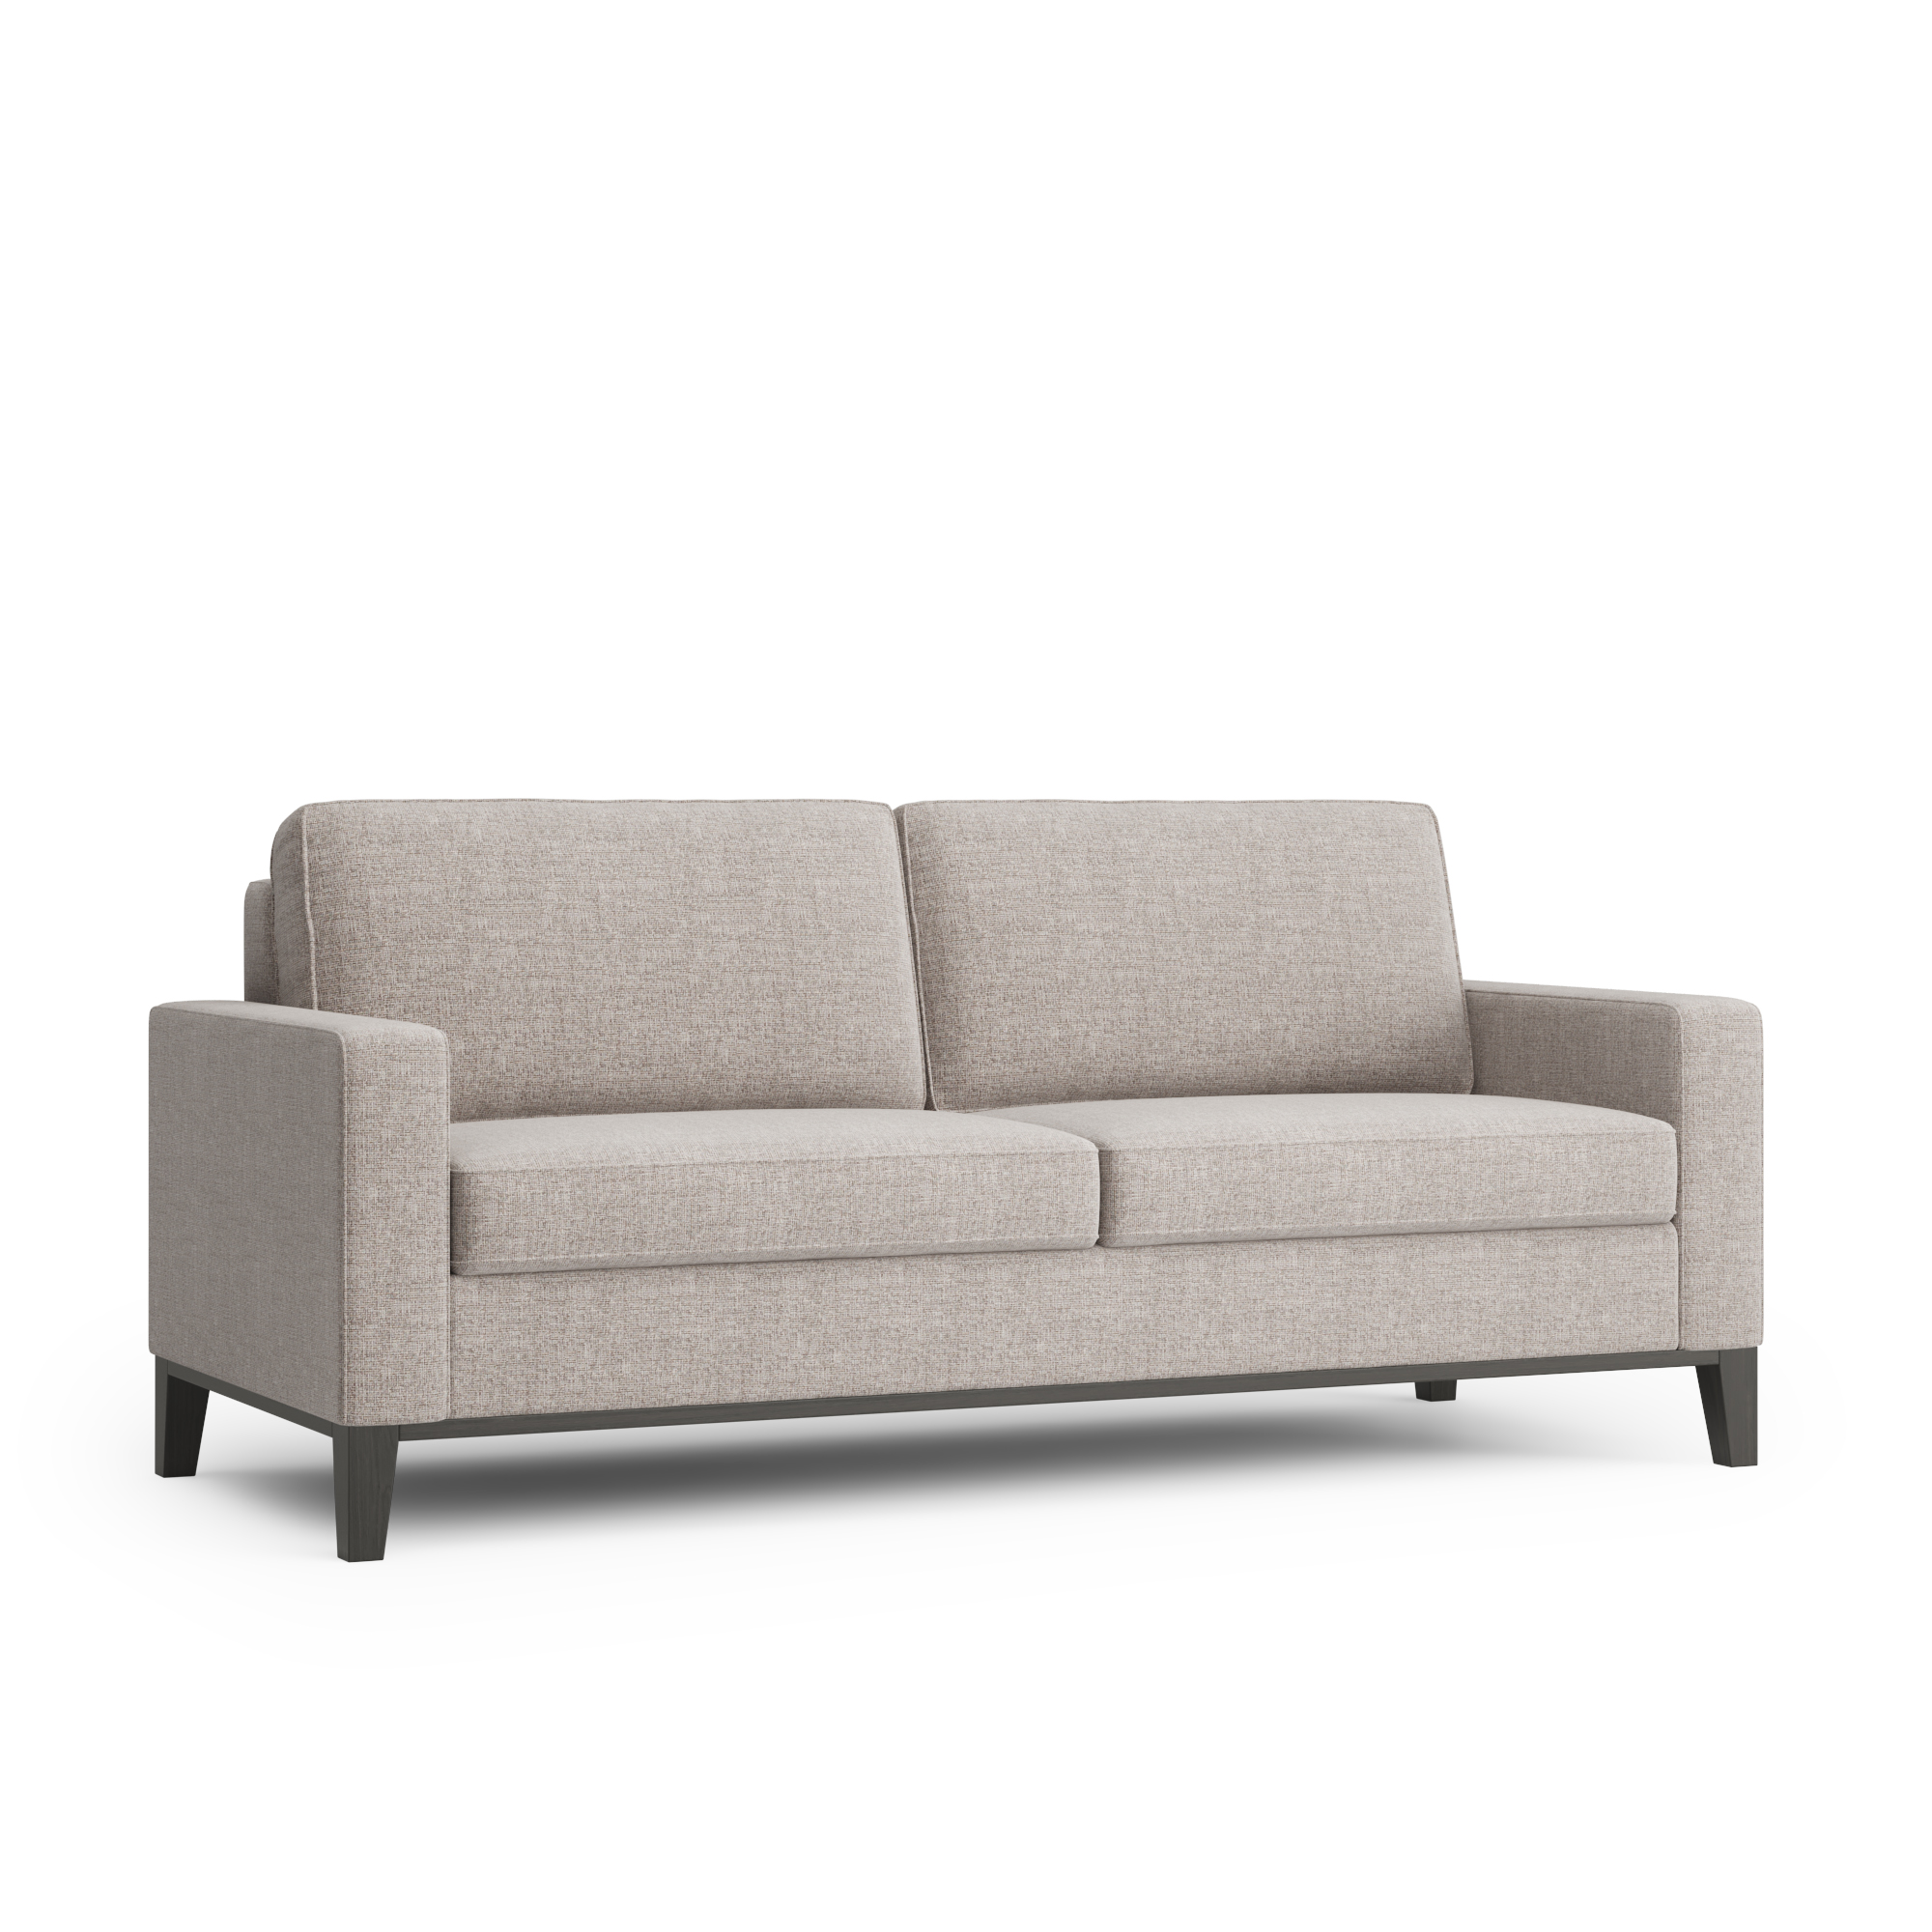 Vera Sofa with Wooden Base